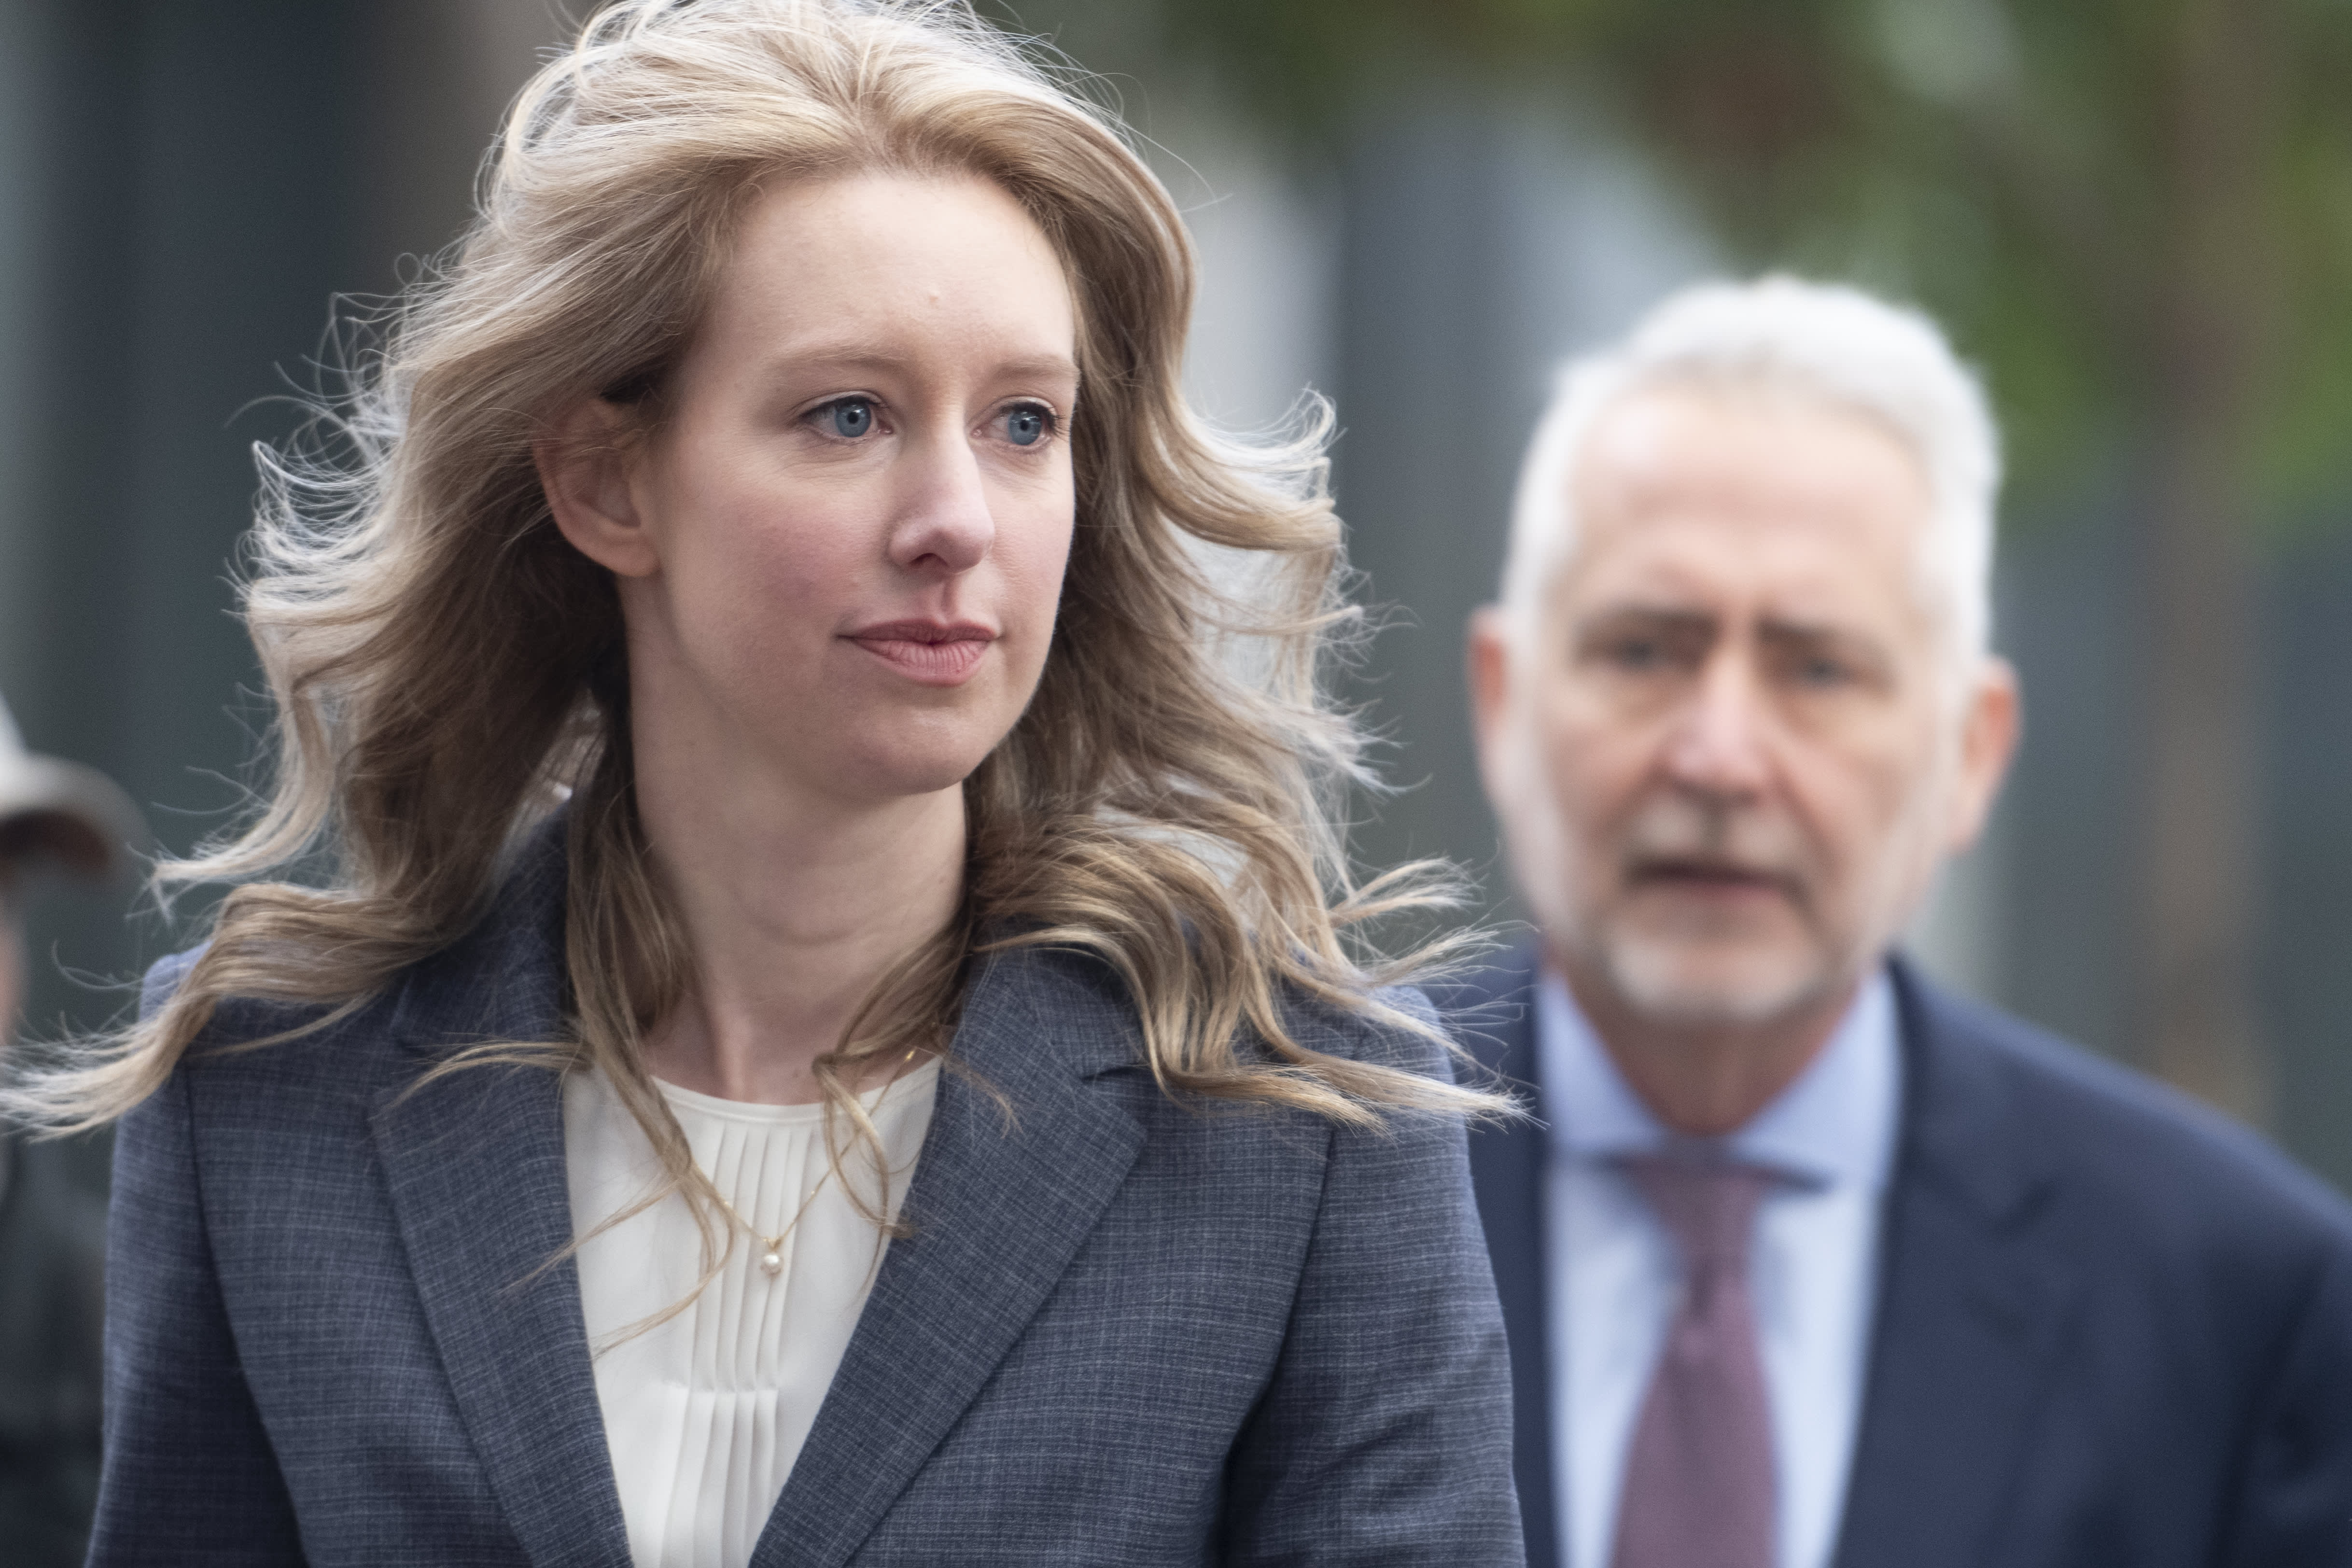 Elizabeth Holmes’ trial is delayed because she is pregnant